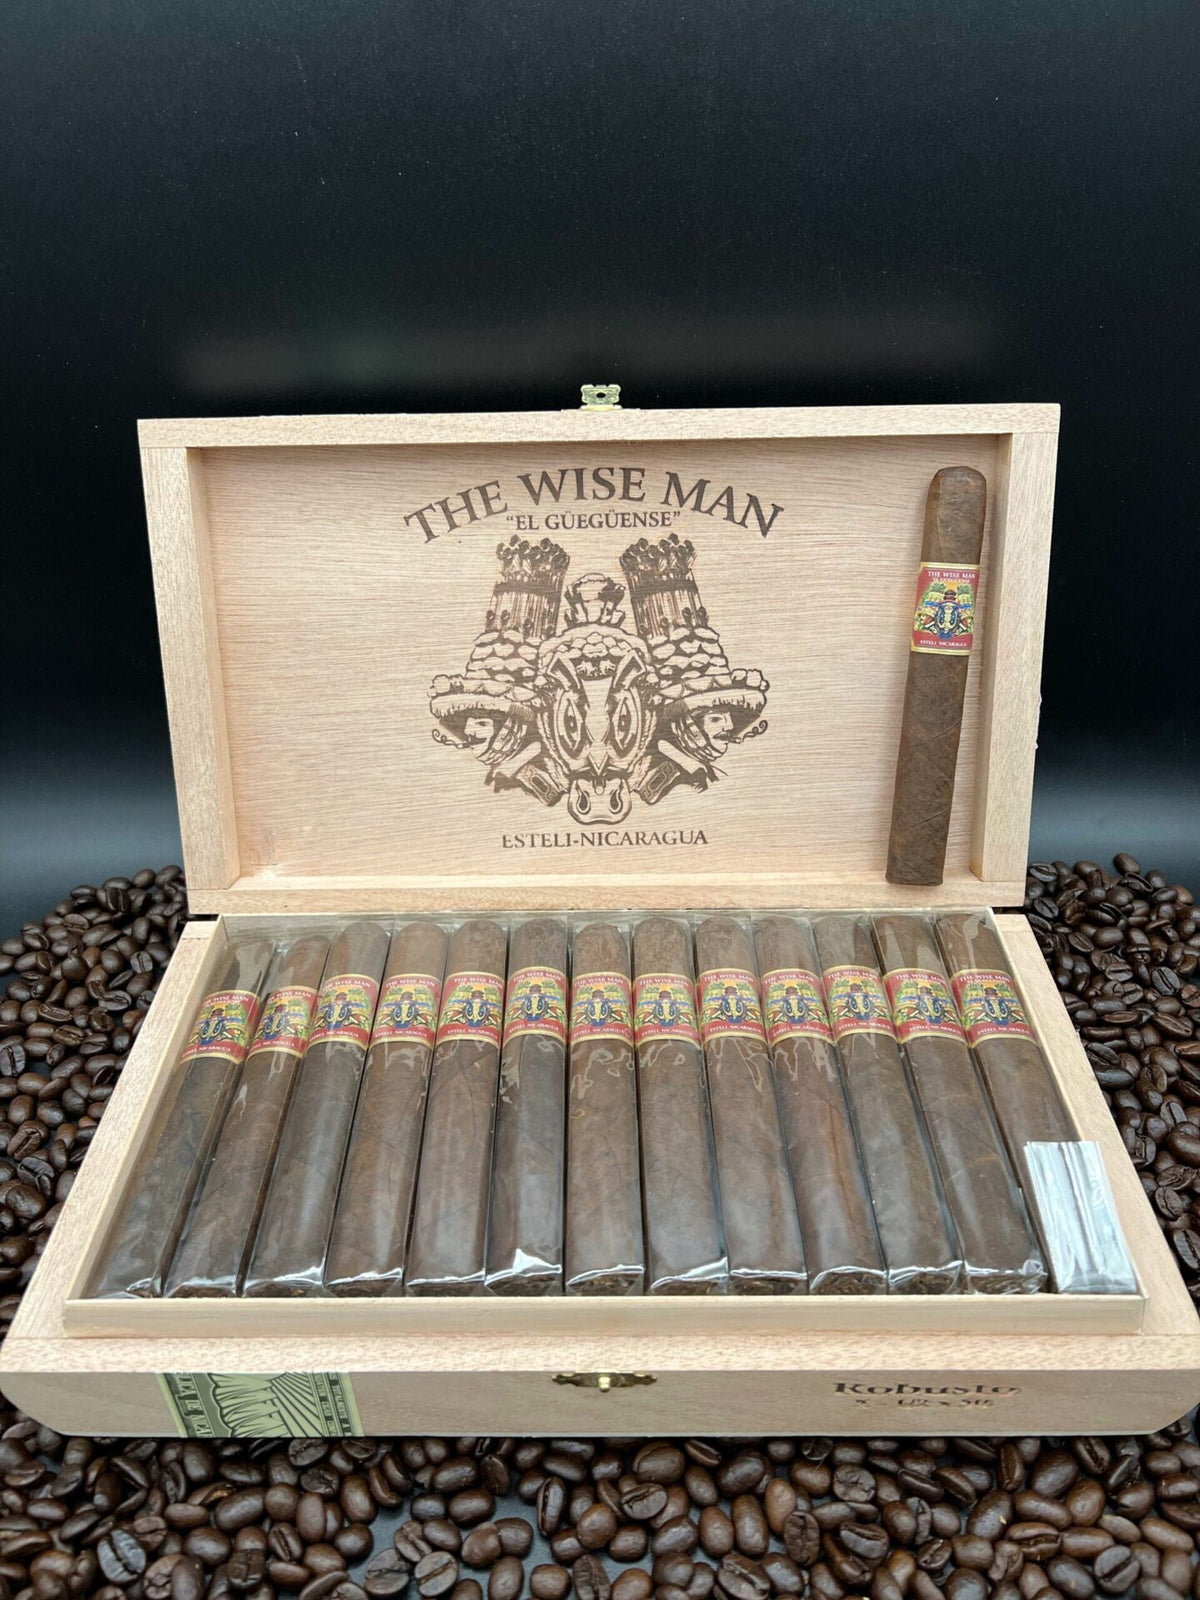 Foundation Cigars - The Wise Man Robusto cigars supplied by Sir Louis Cigars